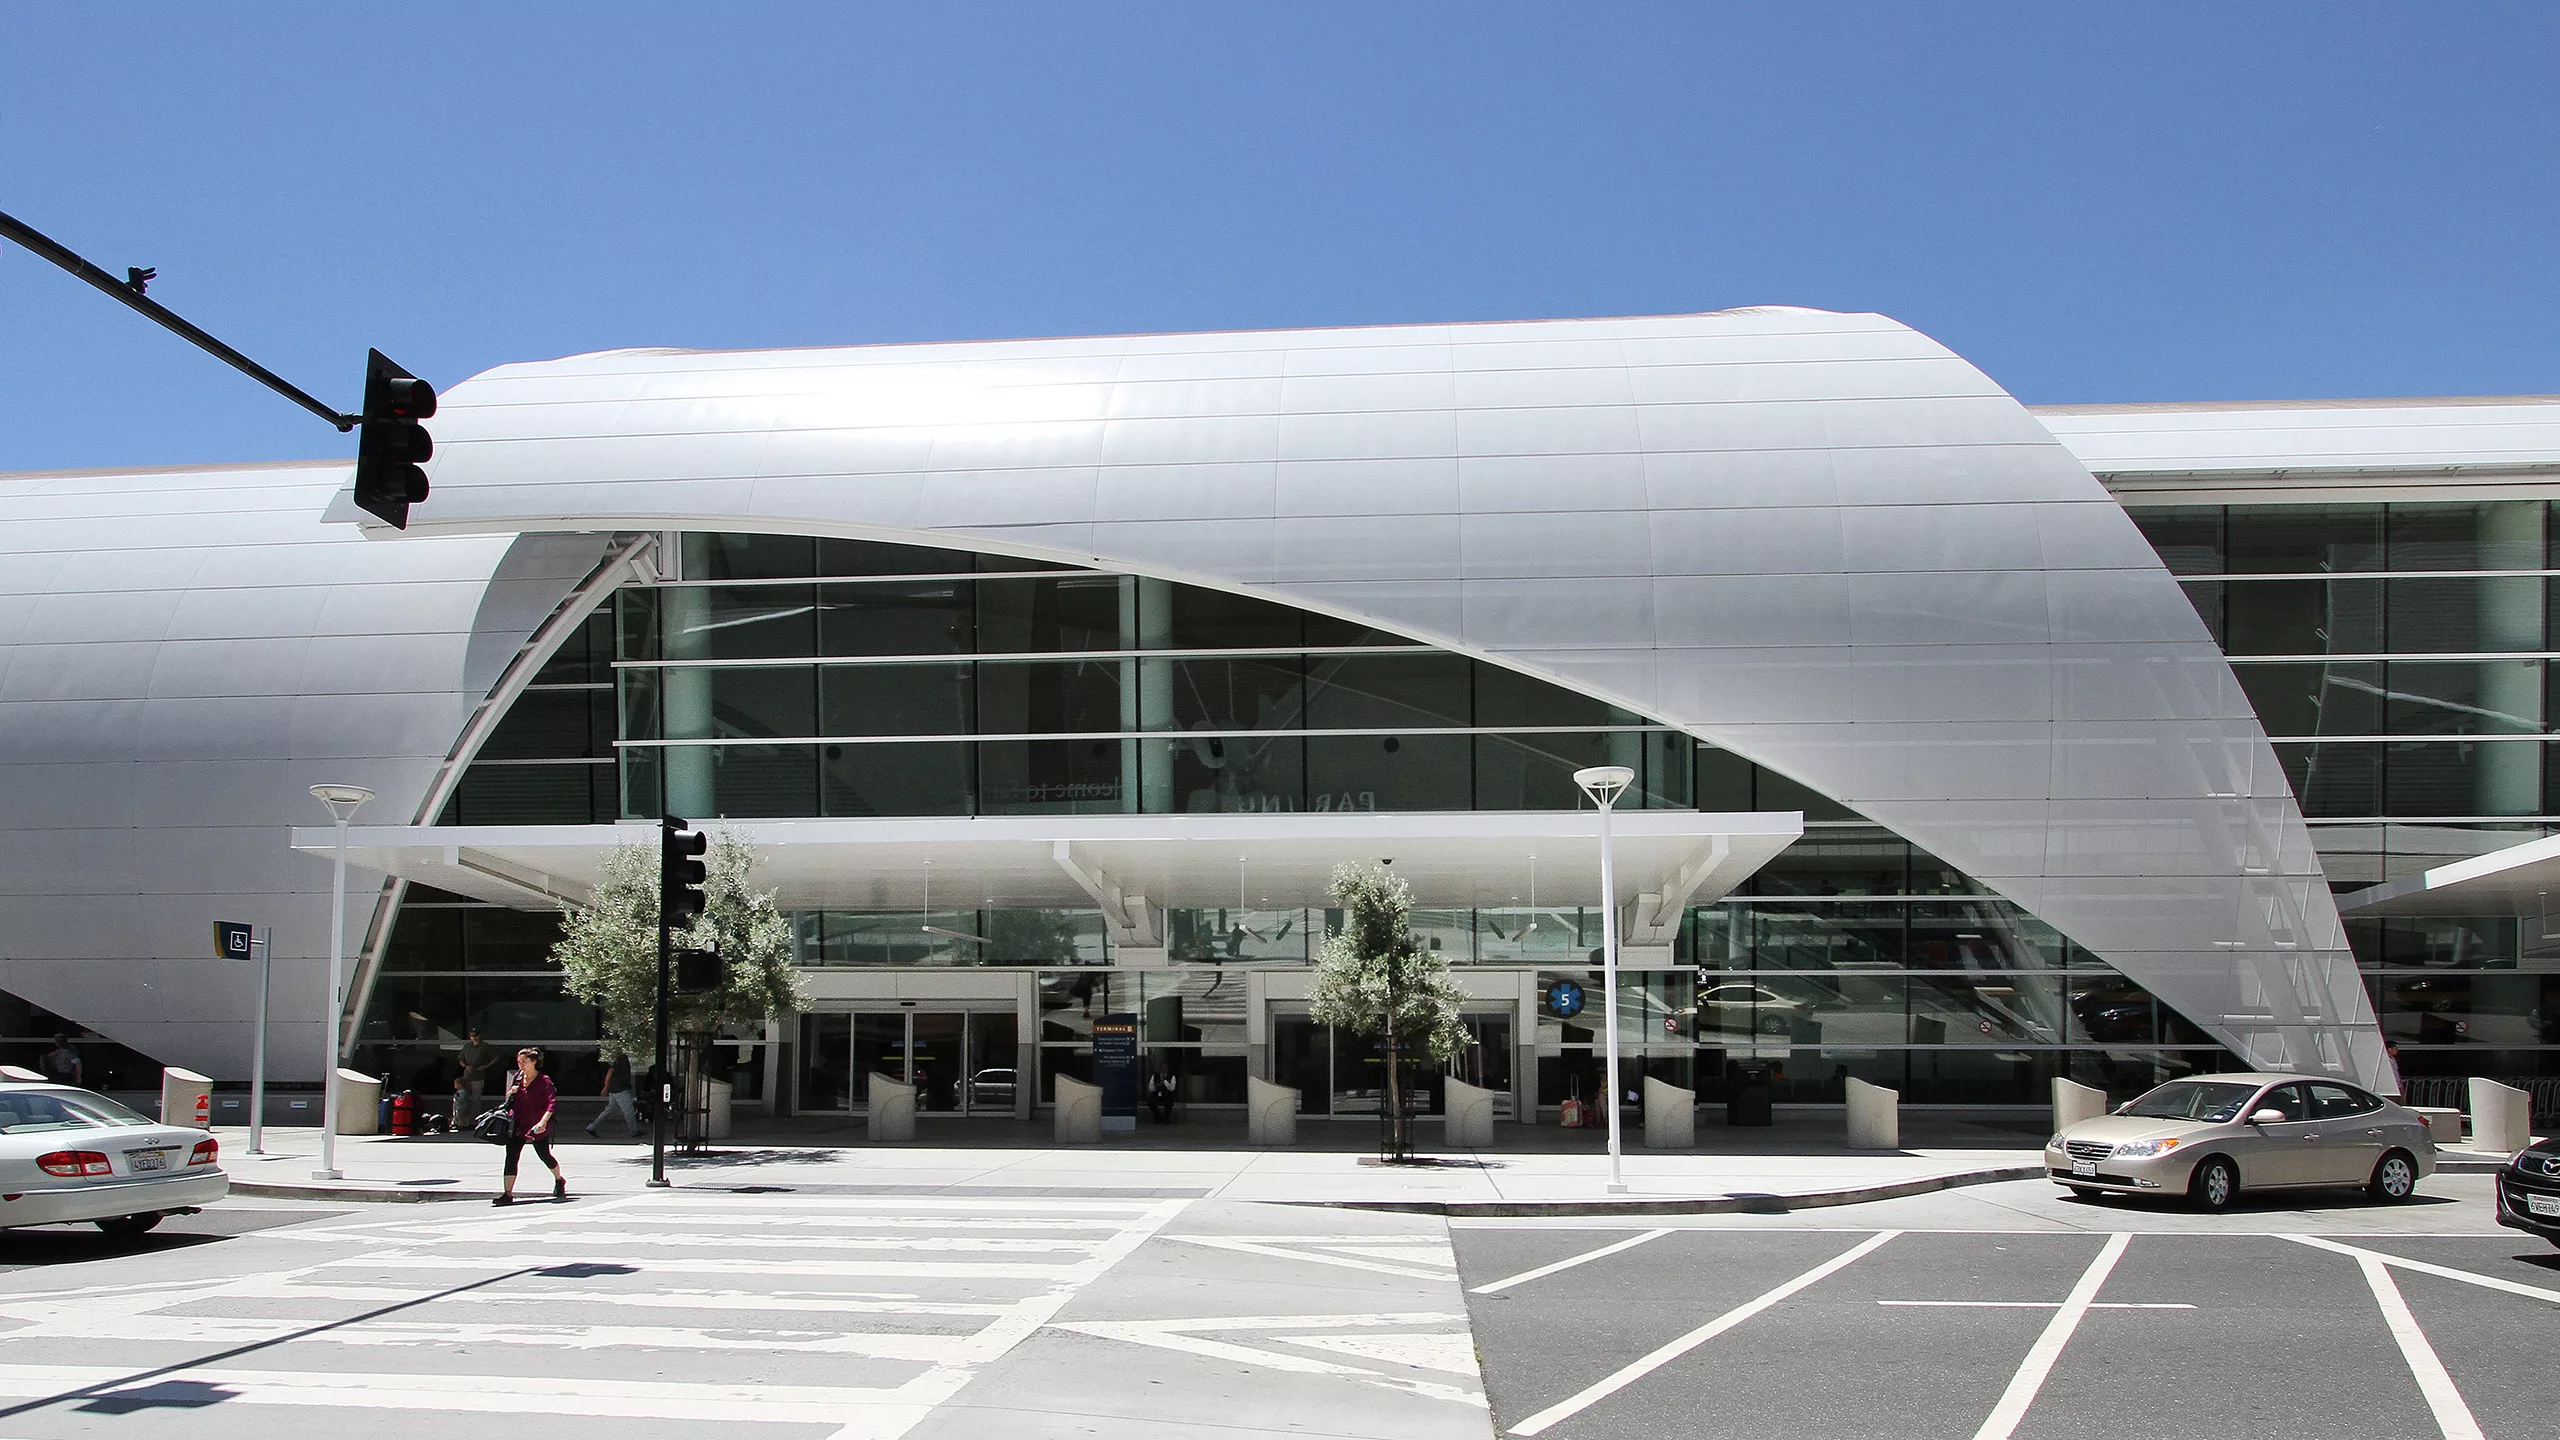 Exterior view of Mineta International Airport's Terminal B in daylight featuring a glass facade partially wrapped in curved metal and several vehicles parked curbside